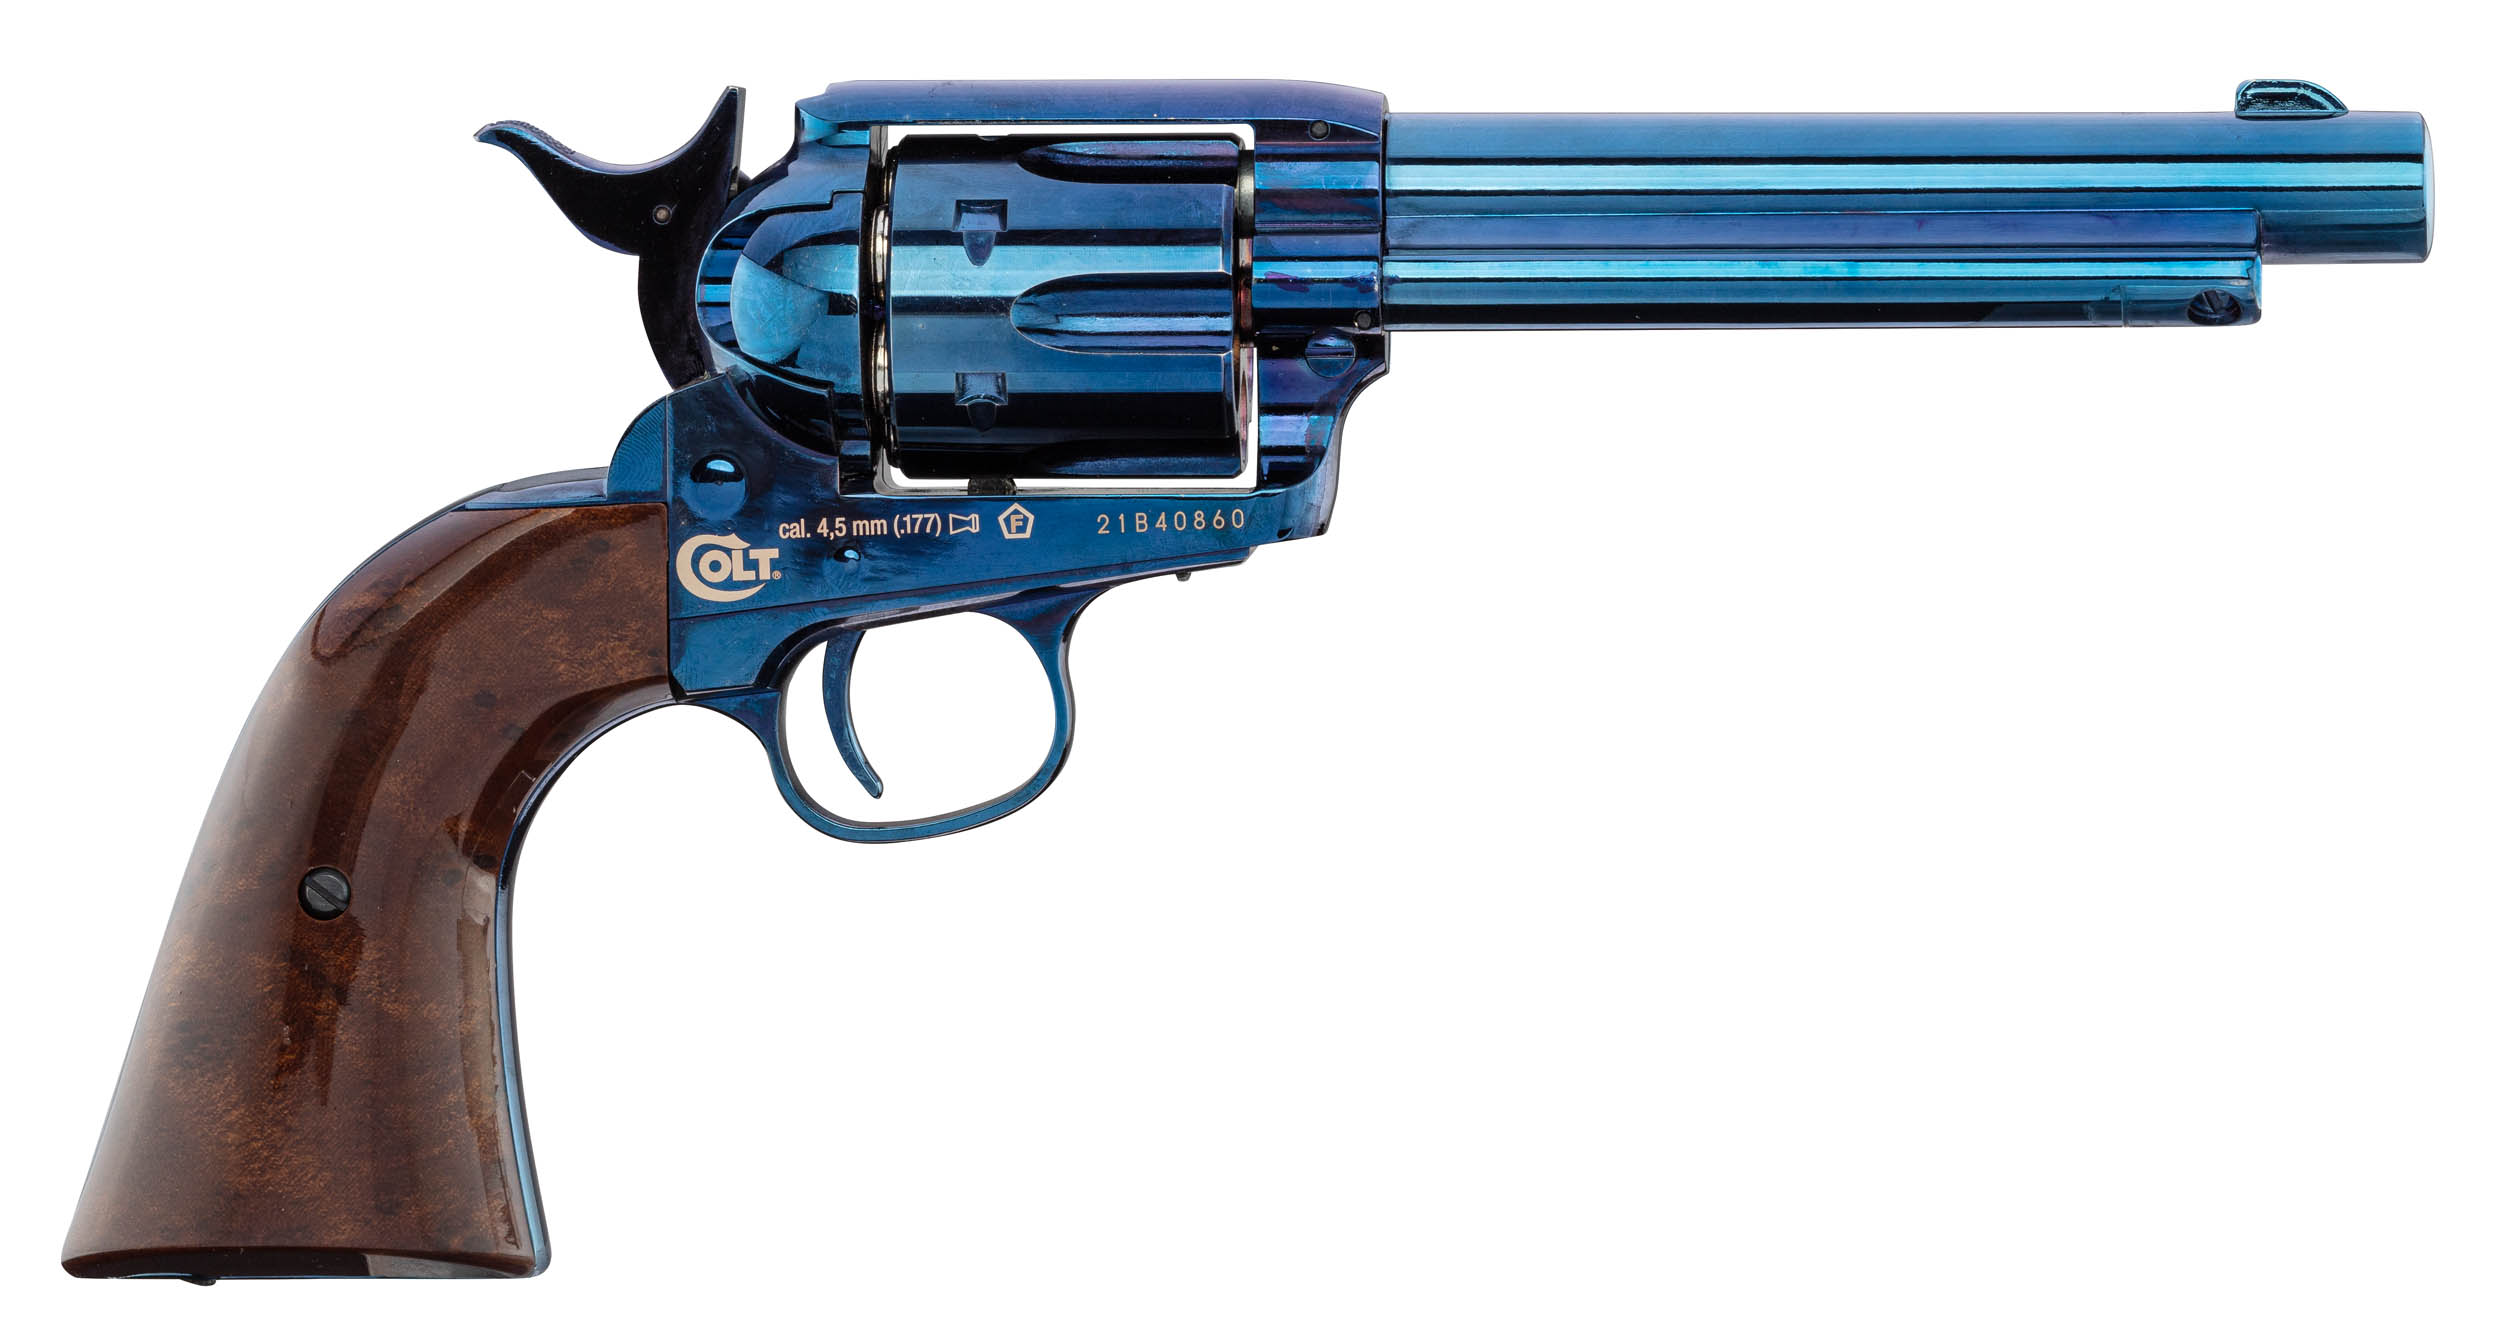 ACR246-03 Colt Simple Action Army 45 revolver blue with diabolos cal. 4.5 mm - ACR246